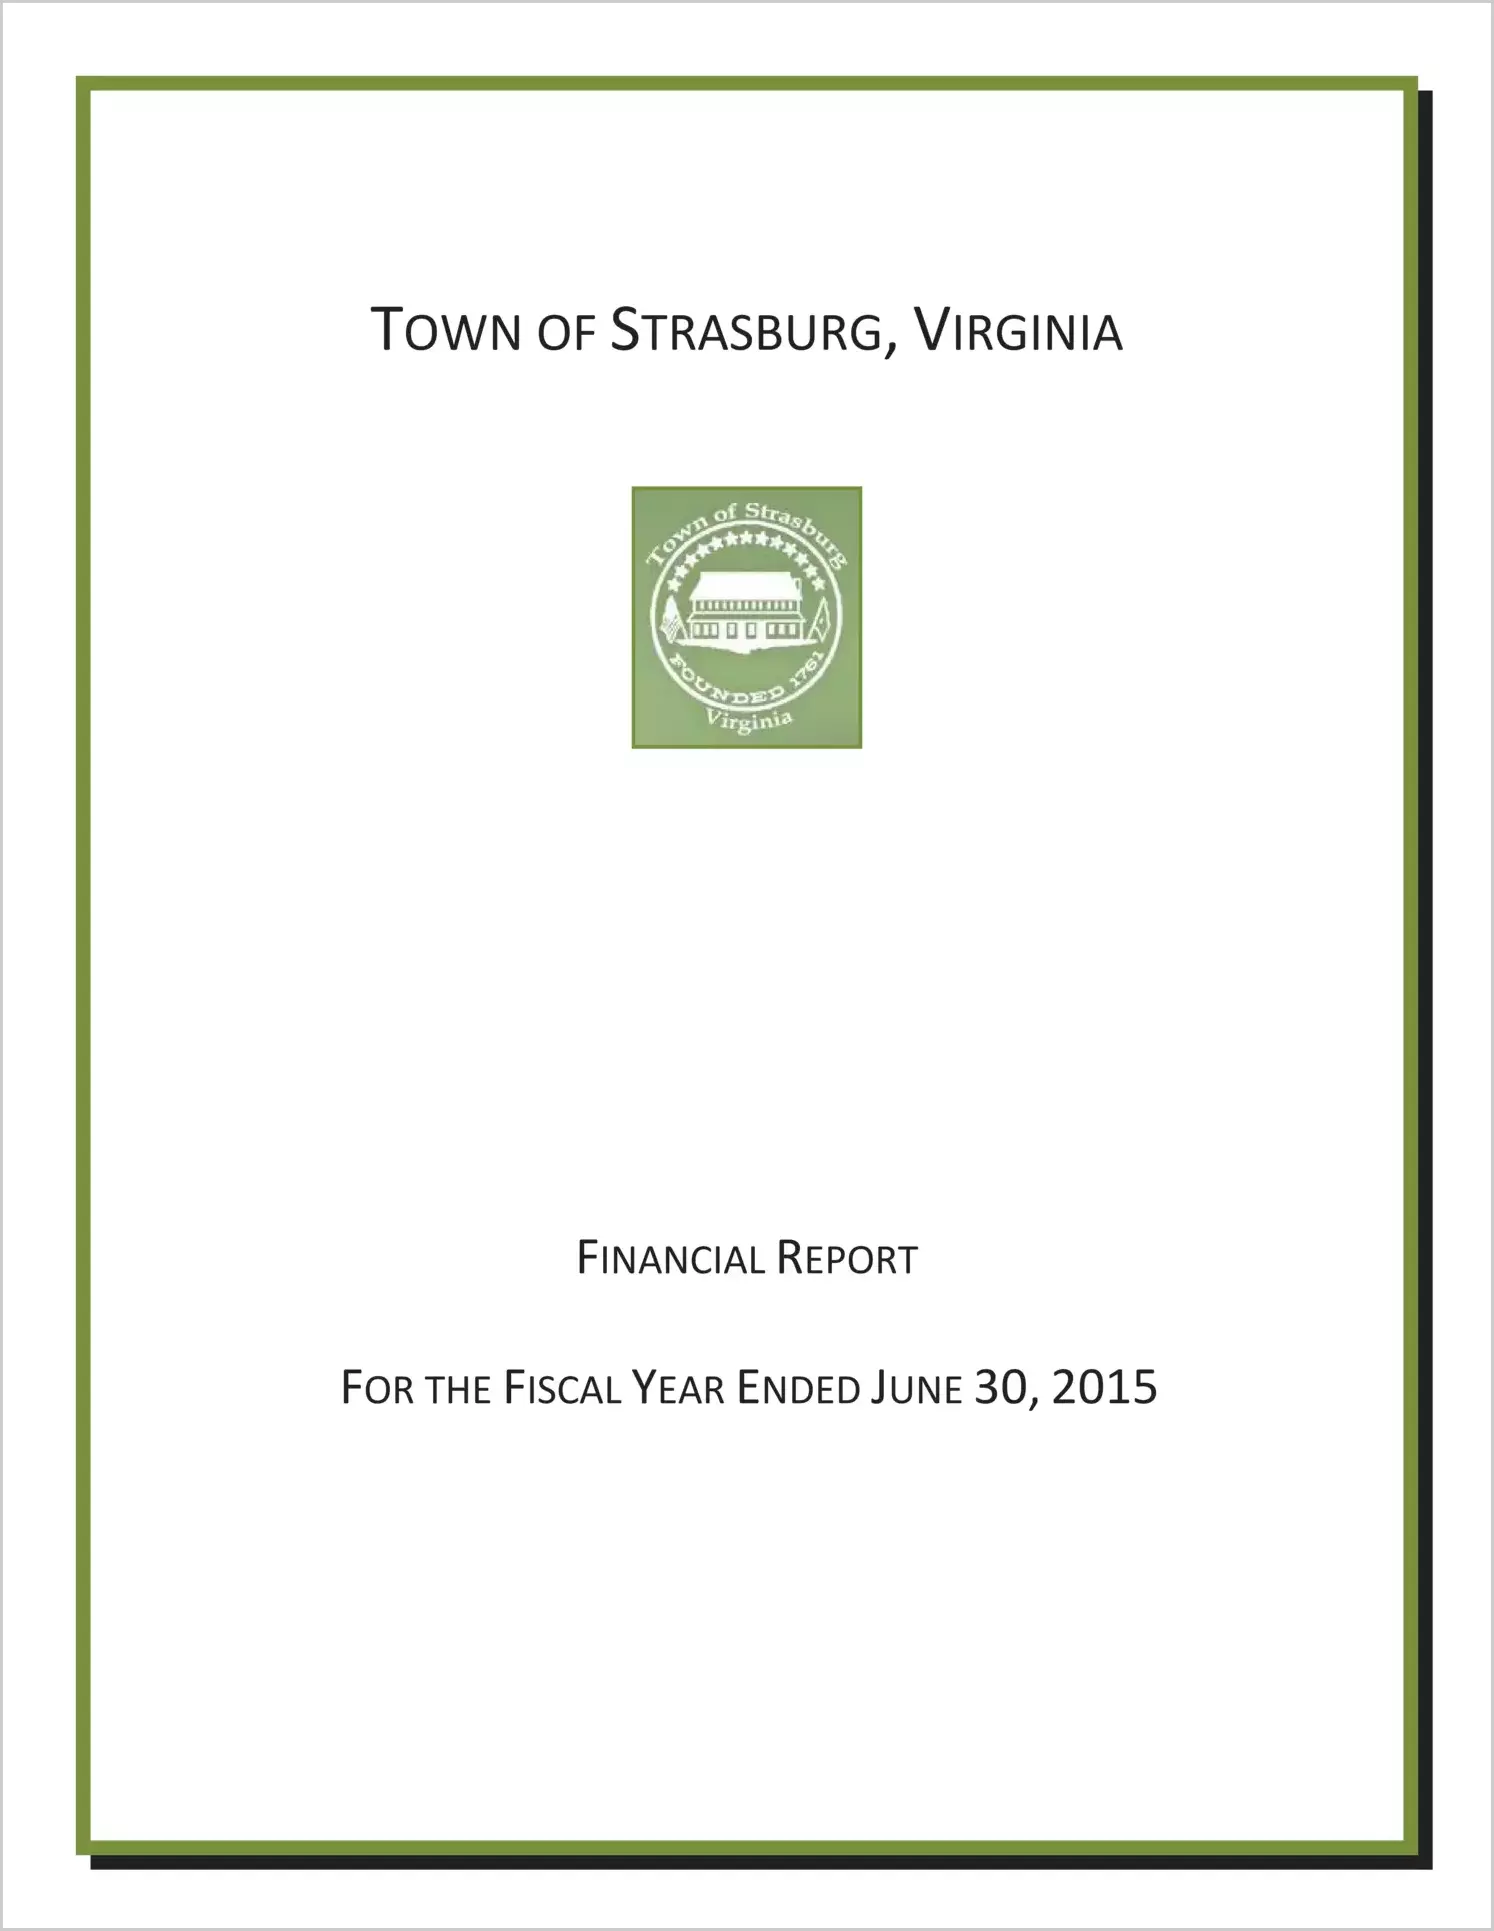 2015 Annual Financial Report for Town of Strasburg